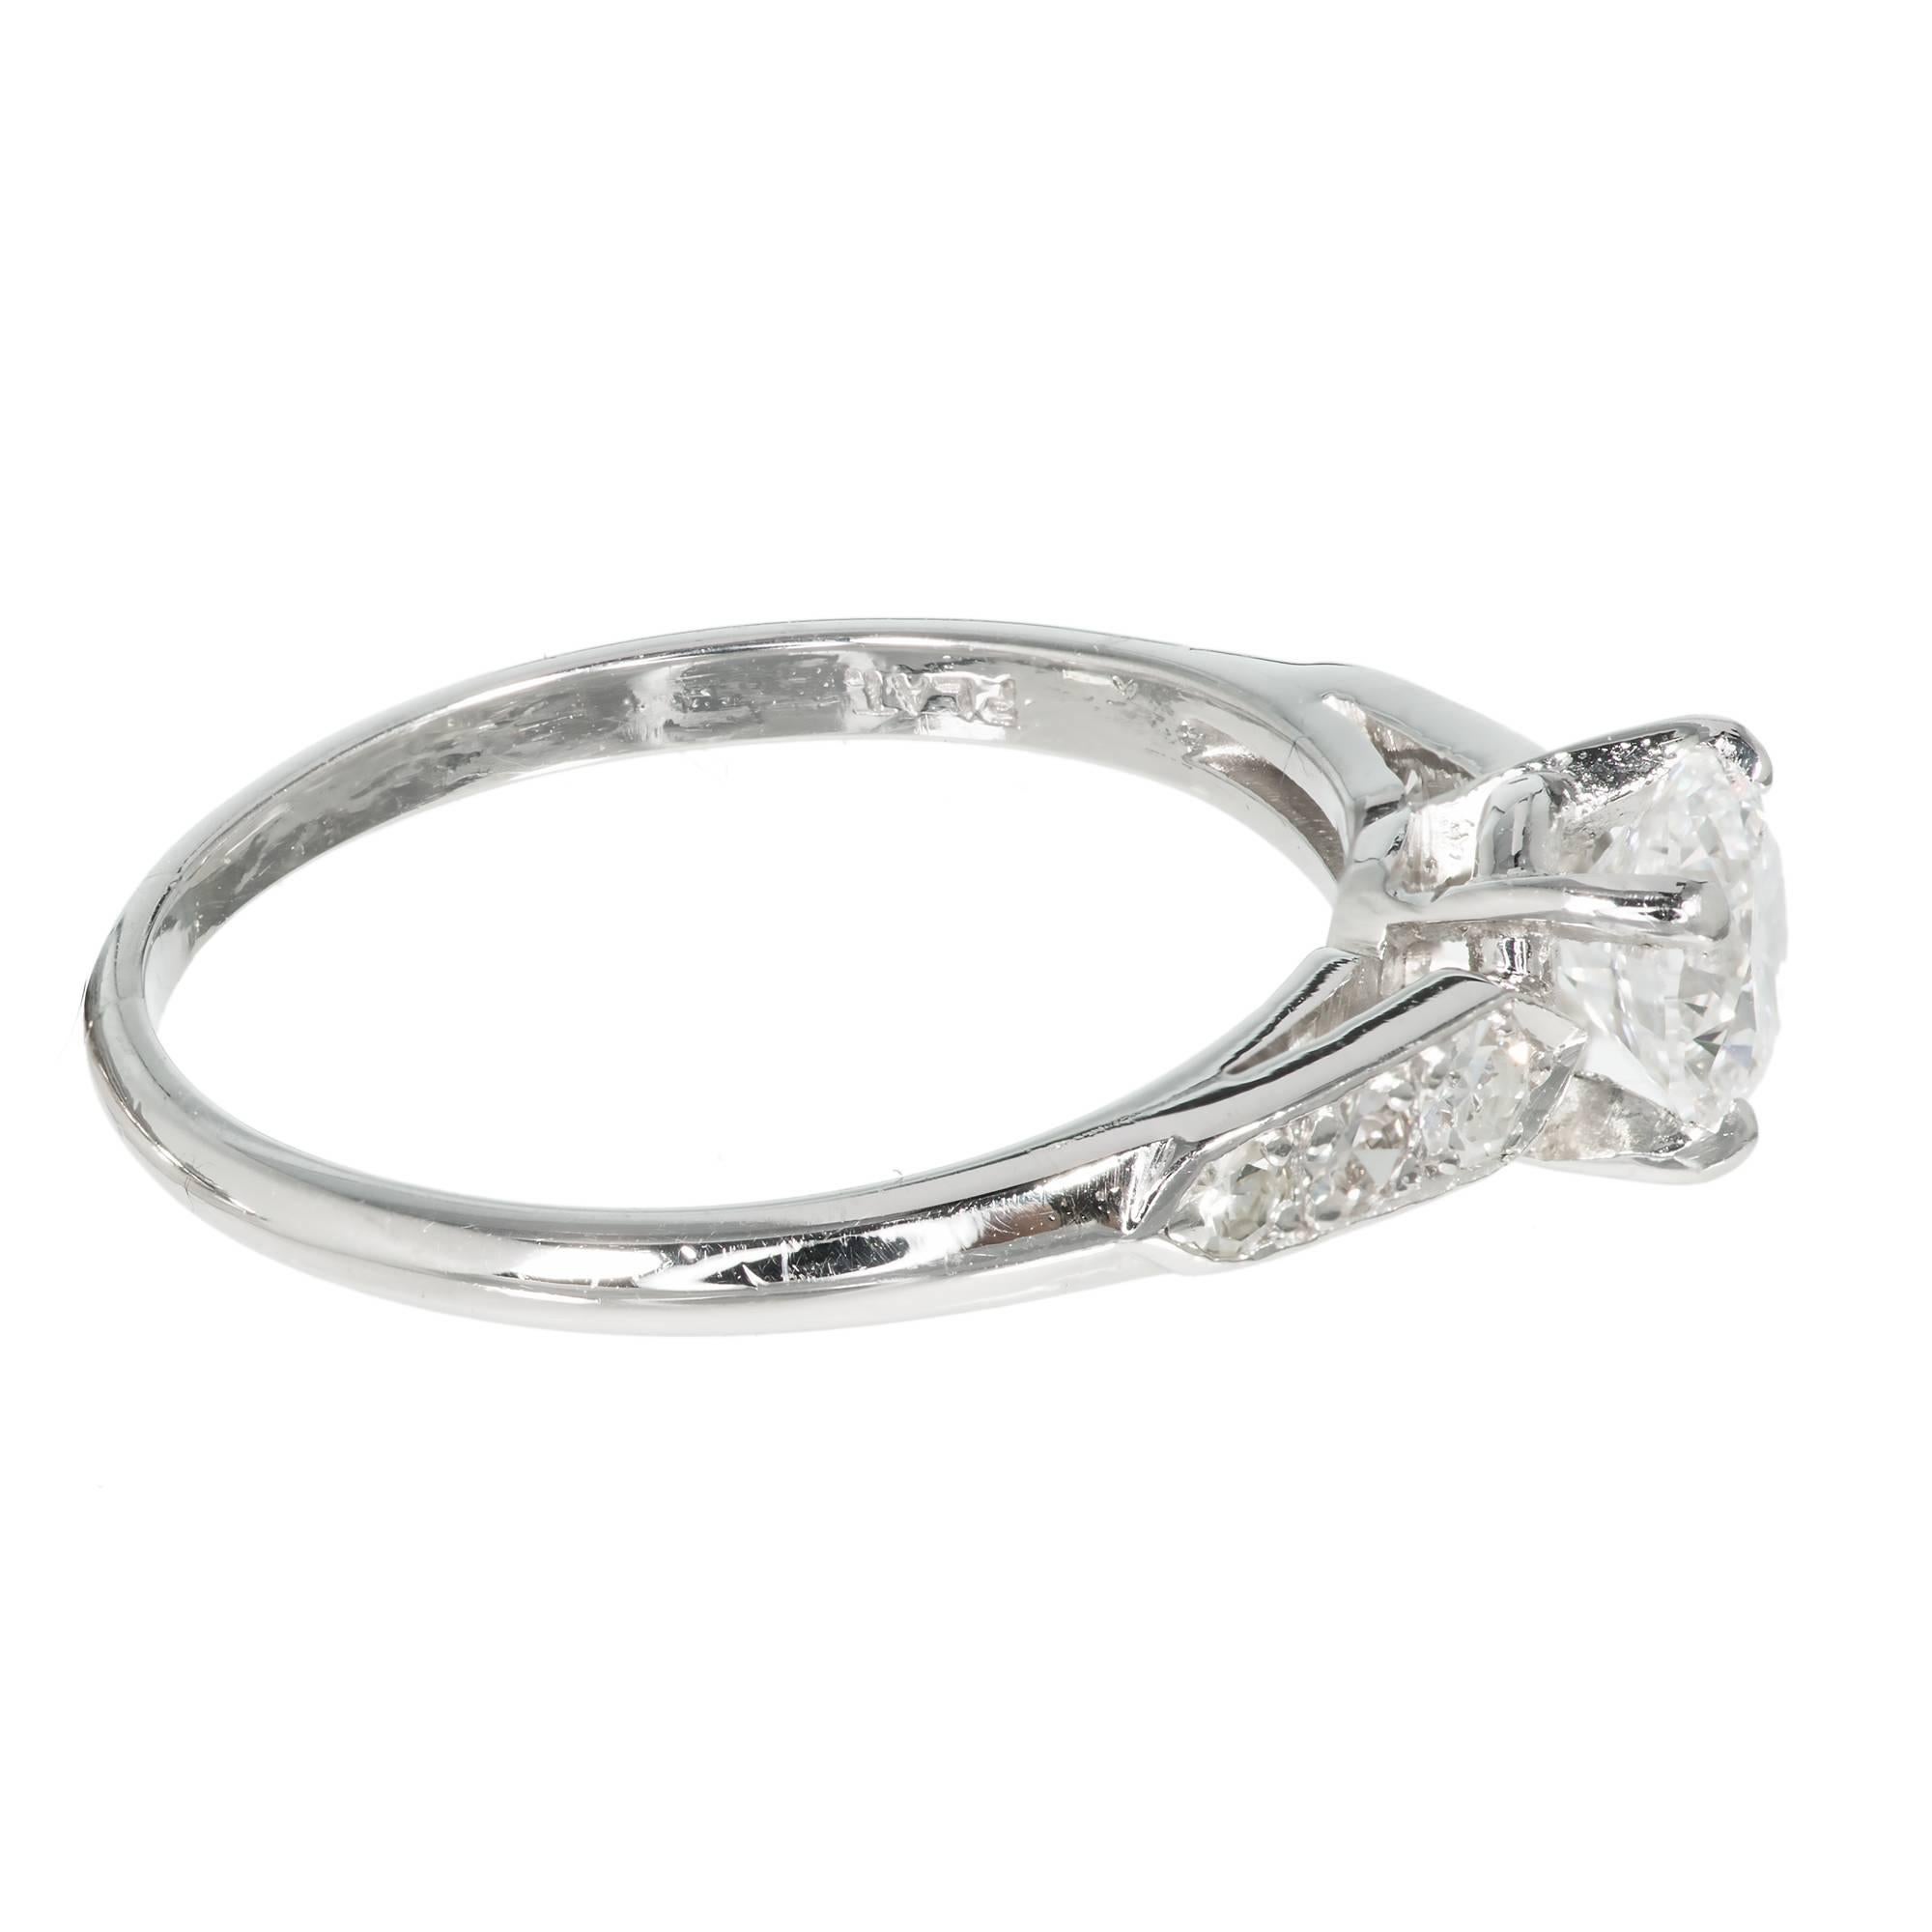 Circa 1930s late Art Deco diamond platinum engagement ring. Platinum setting with side diamonds

1 round transitional cut diamond, approx. total weight .65cts, E to F, VS1, 5.38 x 5.36 x 3.22mm, Depth: 59.9% Table: 58% EGL certificate